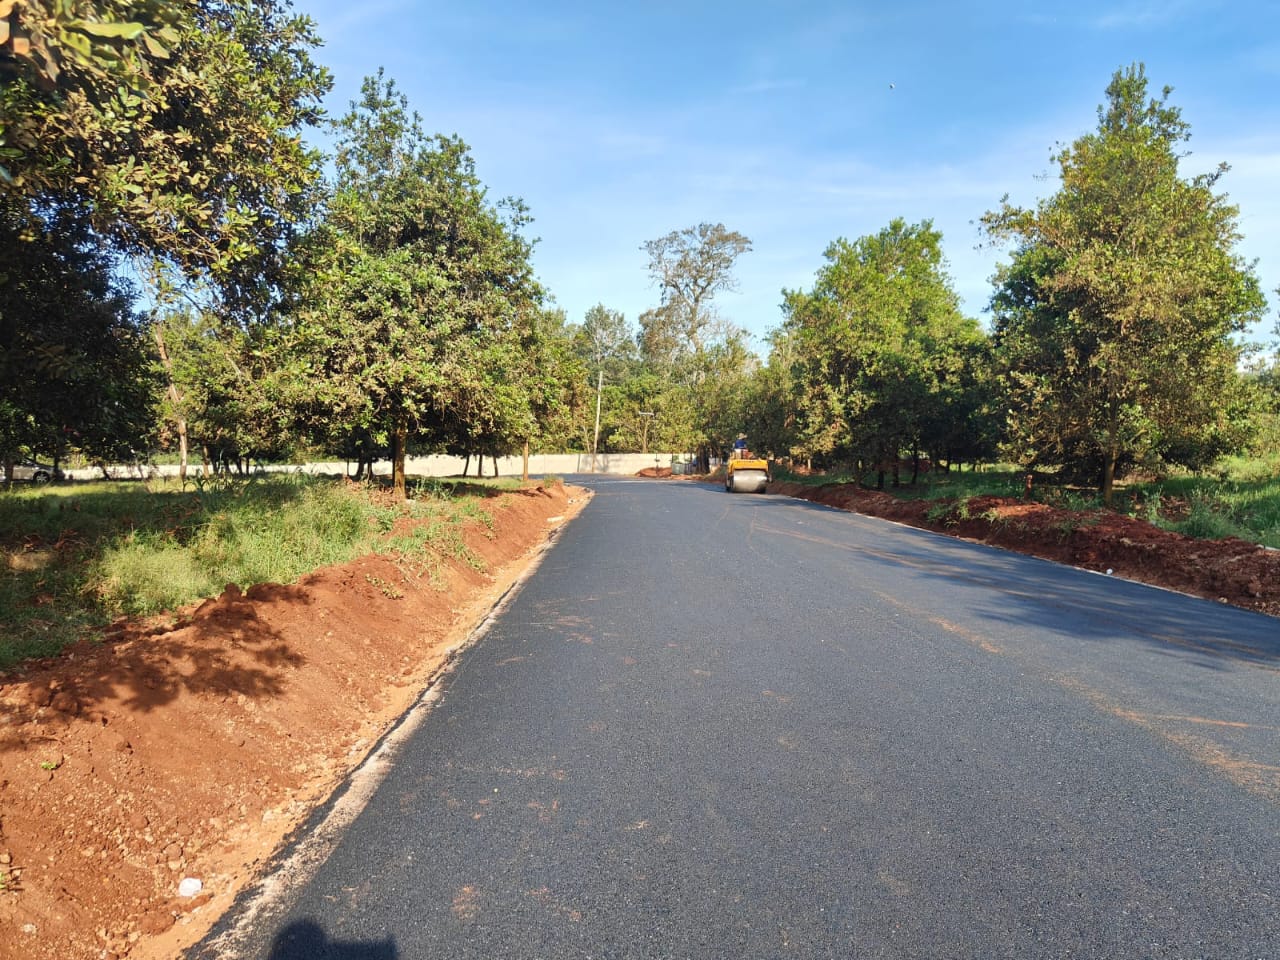 Why Thika Grove Chania is the Ideal Gated Community for Your Dream Home